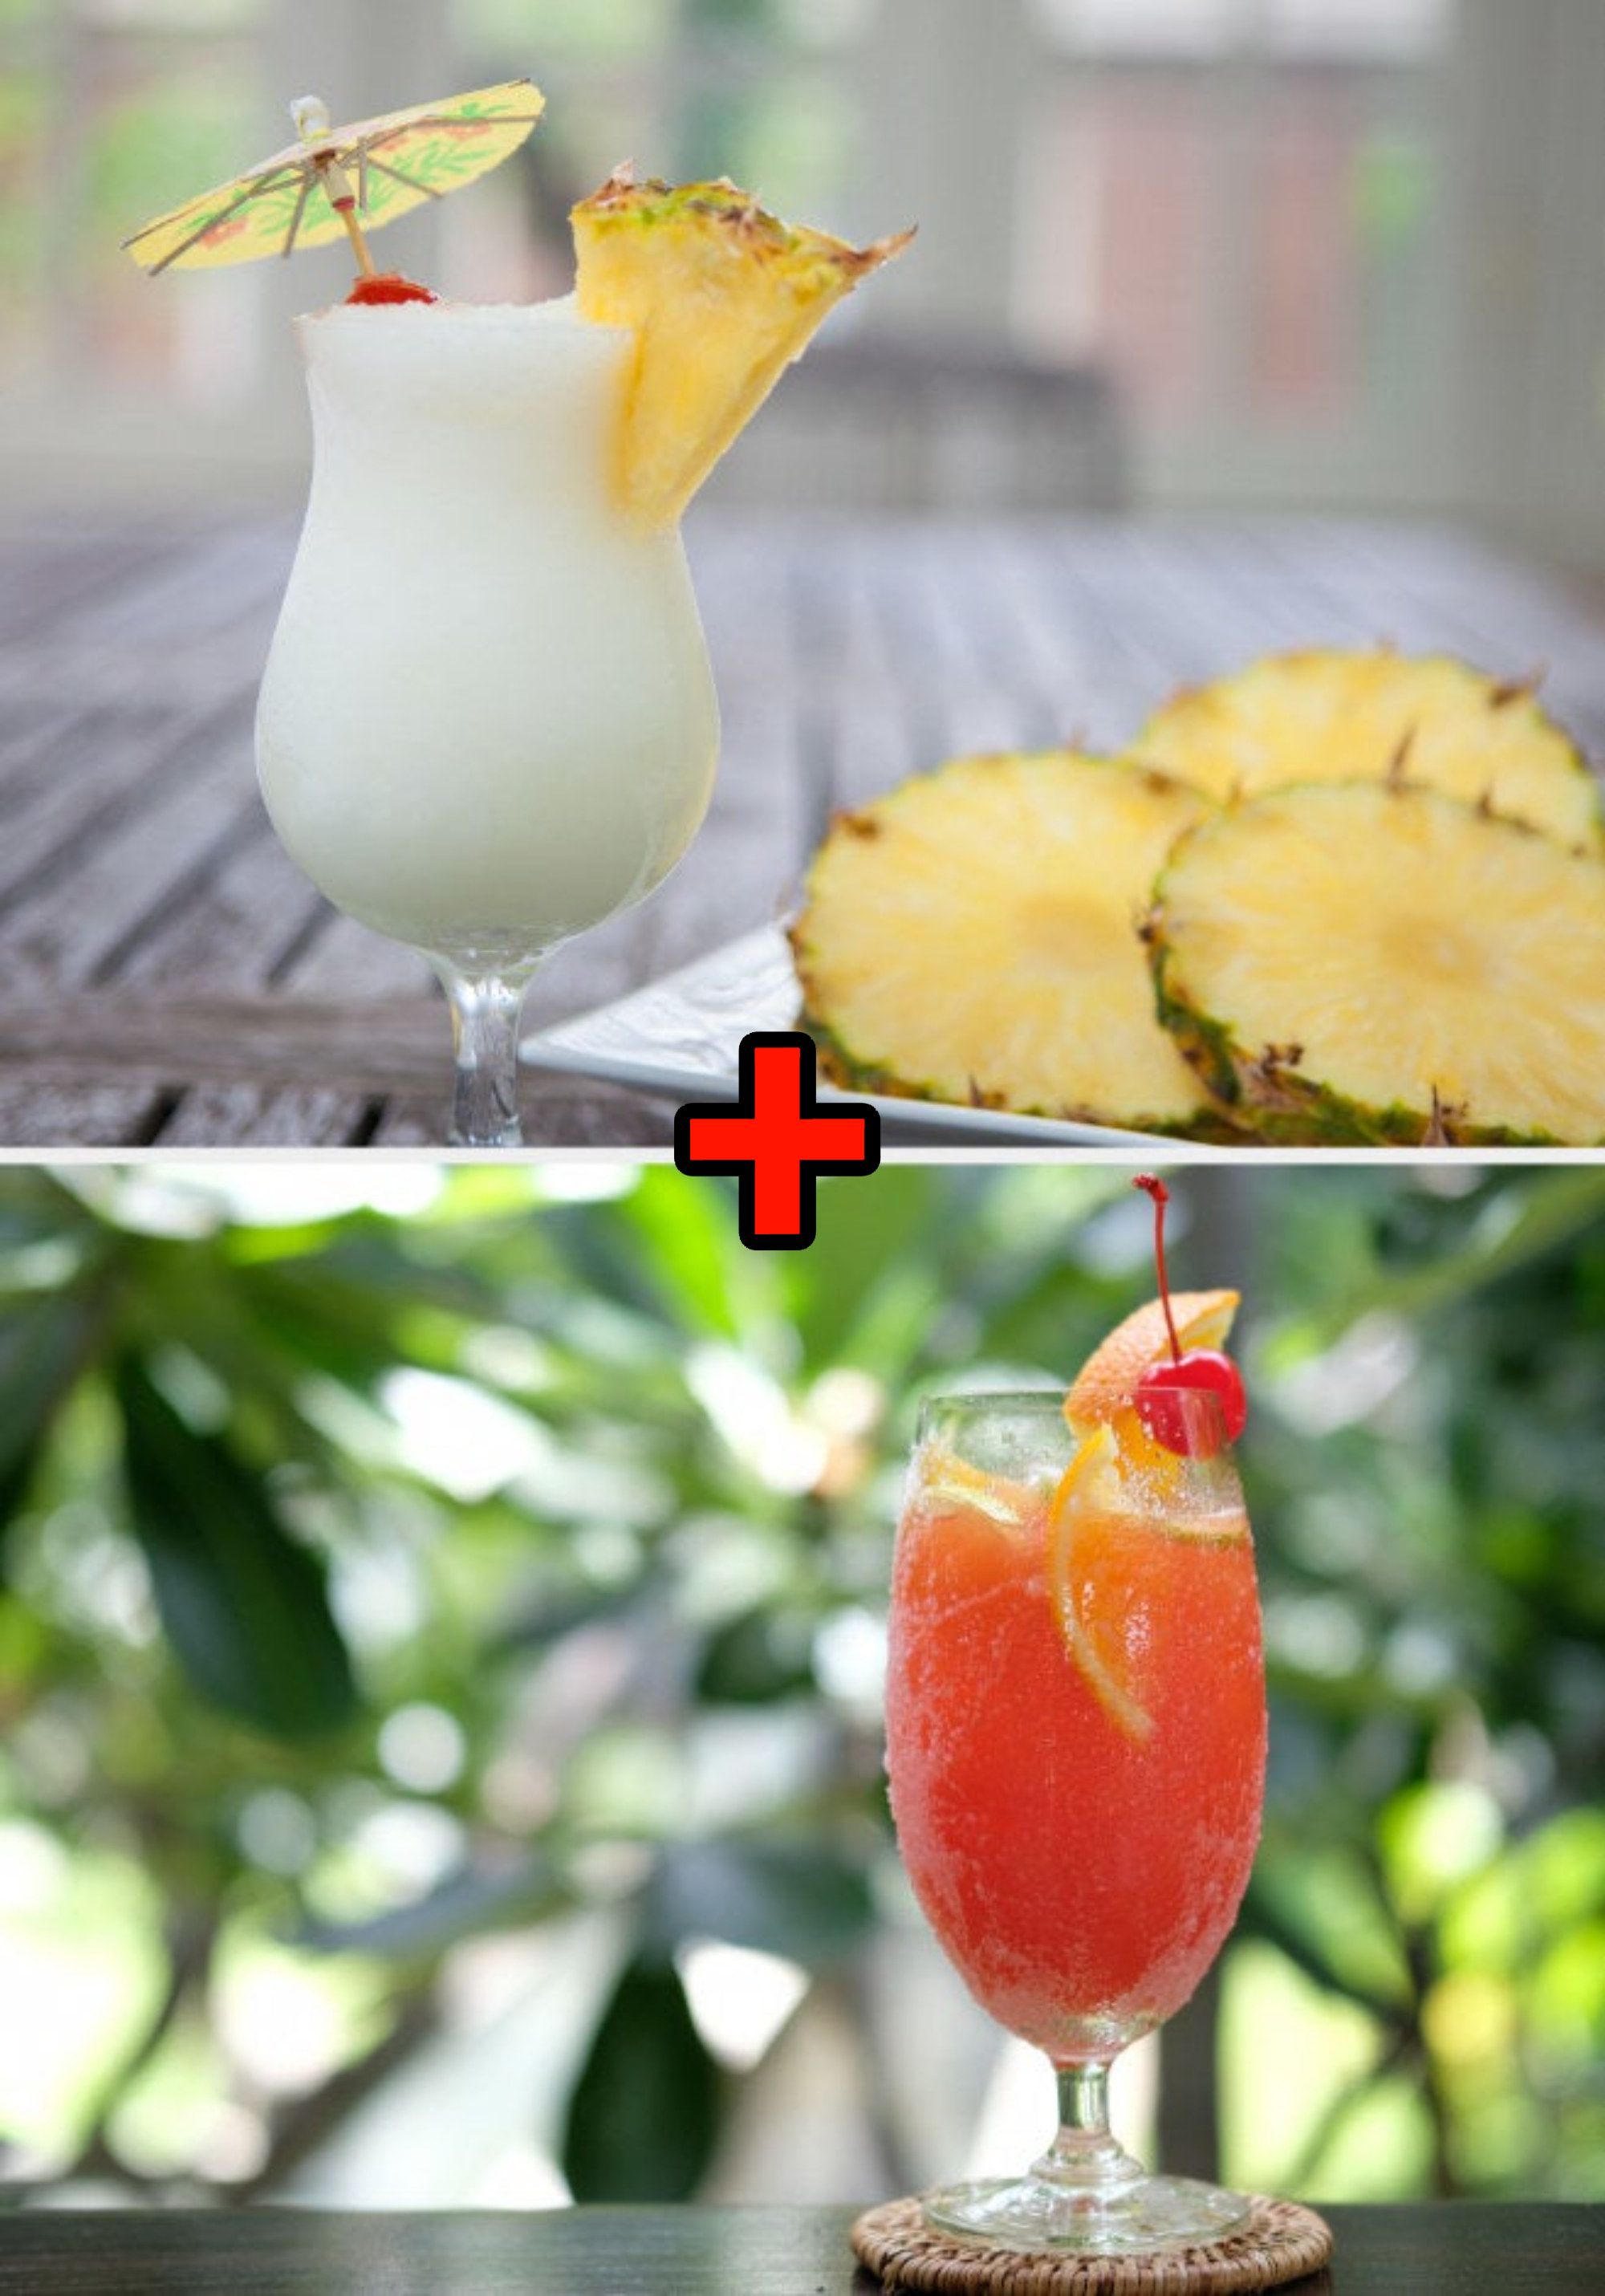 Piña colada drink with pineapple; Rum runner tropical drink with cherry and orange